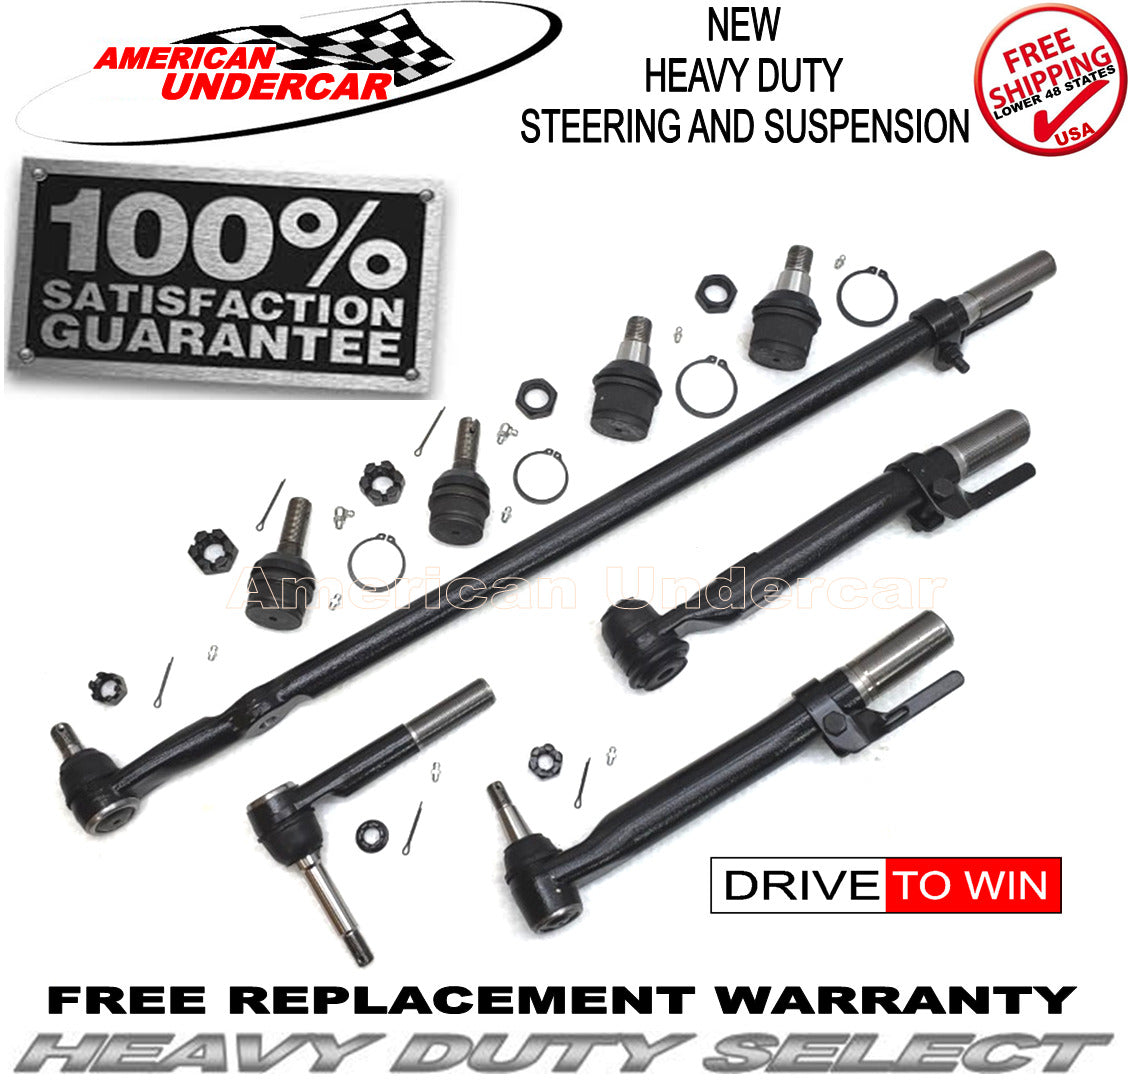 HD Ball Joint Drag Link Tie Rod Steering Kit Ford F250 F350 Super Duty 4x4 08-10